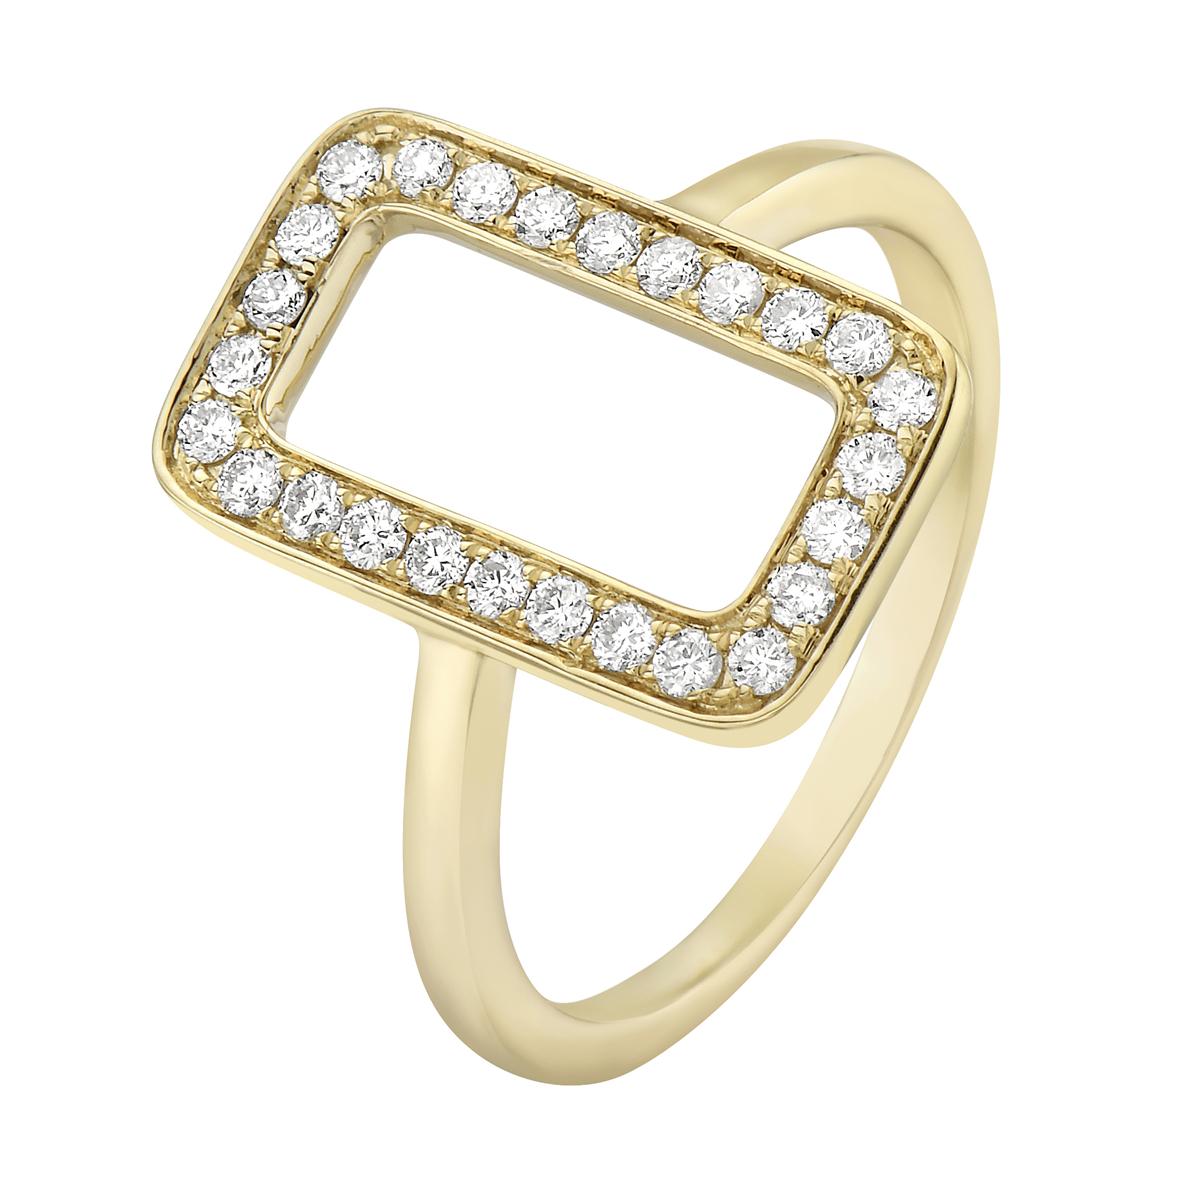 With this exquisite yellow-gold diamond ring, style and glamour are in the spotlight. This ring is set in 14-karat gold, made out of 3.1 grams of gold. The color of the diamonds is SI. The clarity is VS2-SI1. It is made out of 26 diamonds totaling